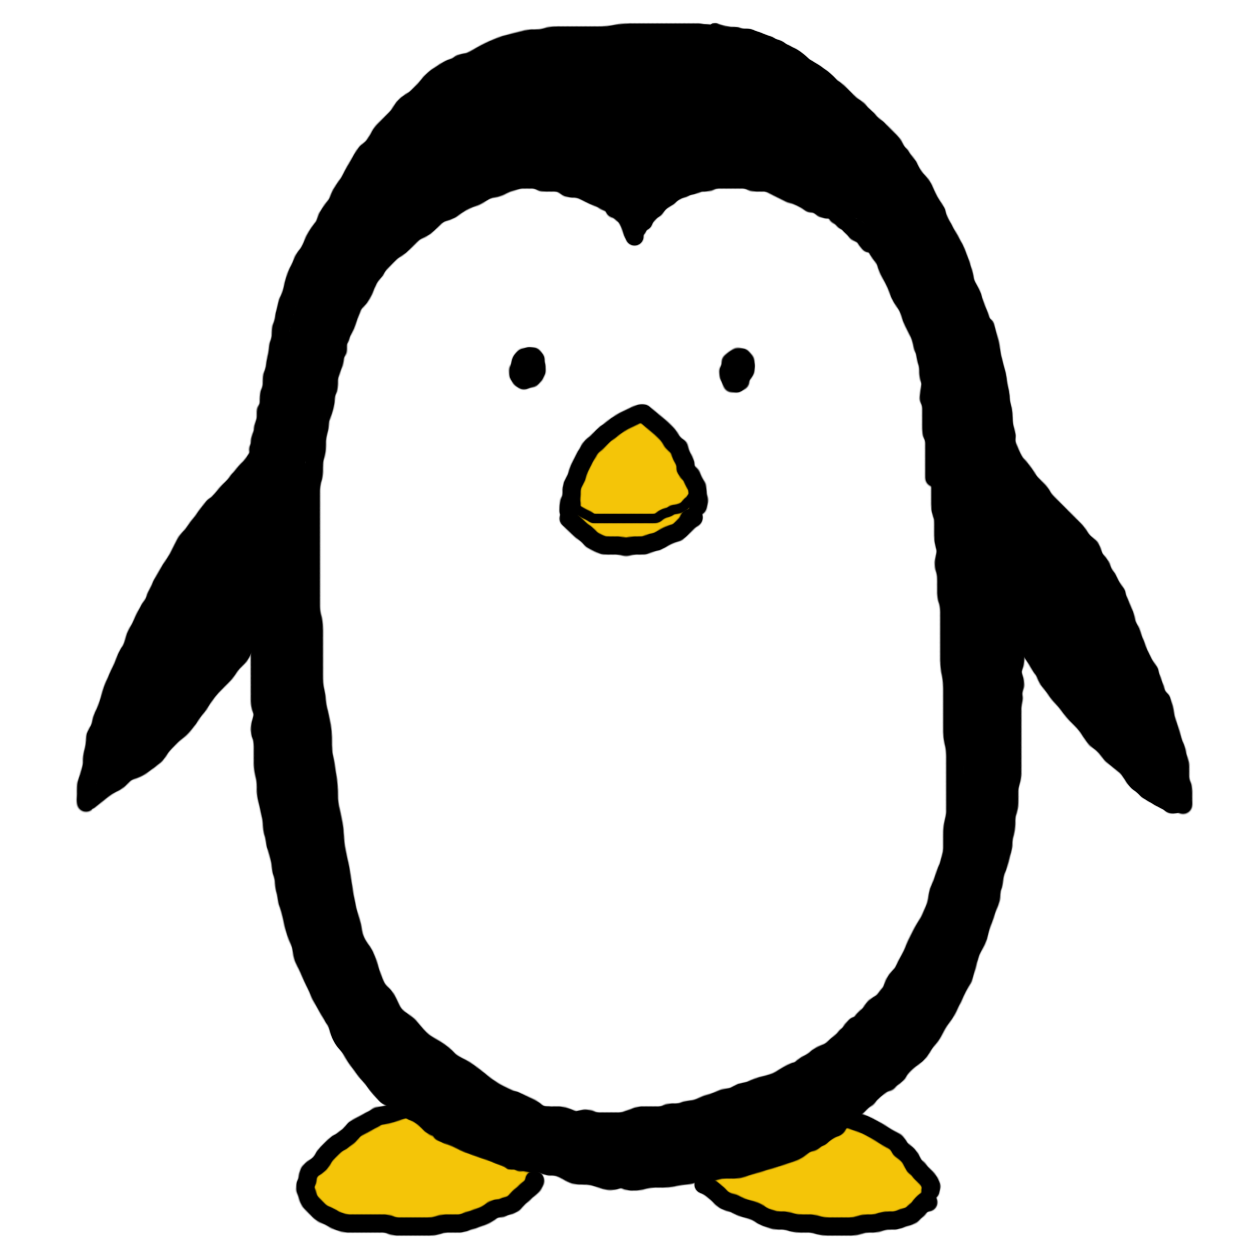 Penguin Clip Art Black And White - Free Clipart Images